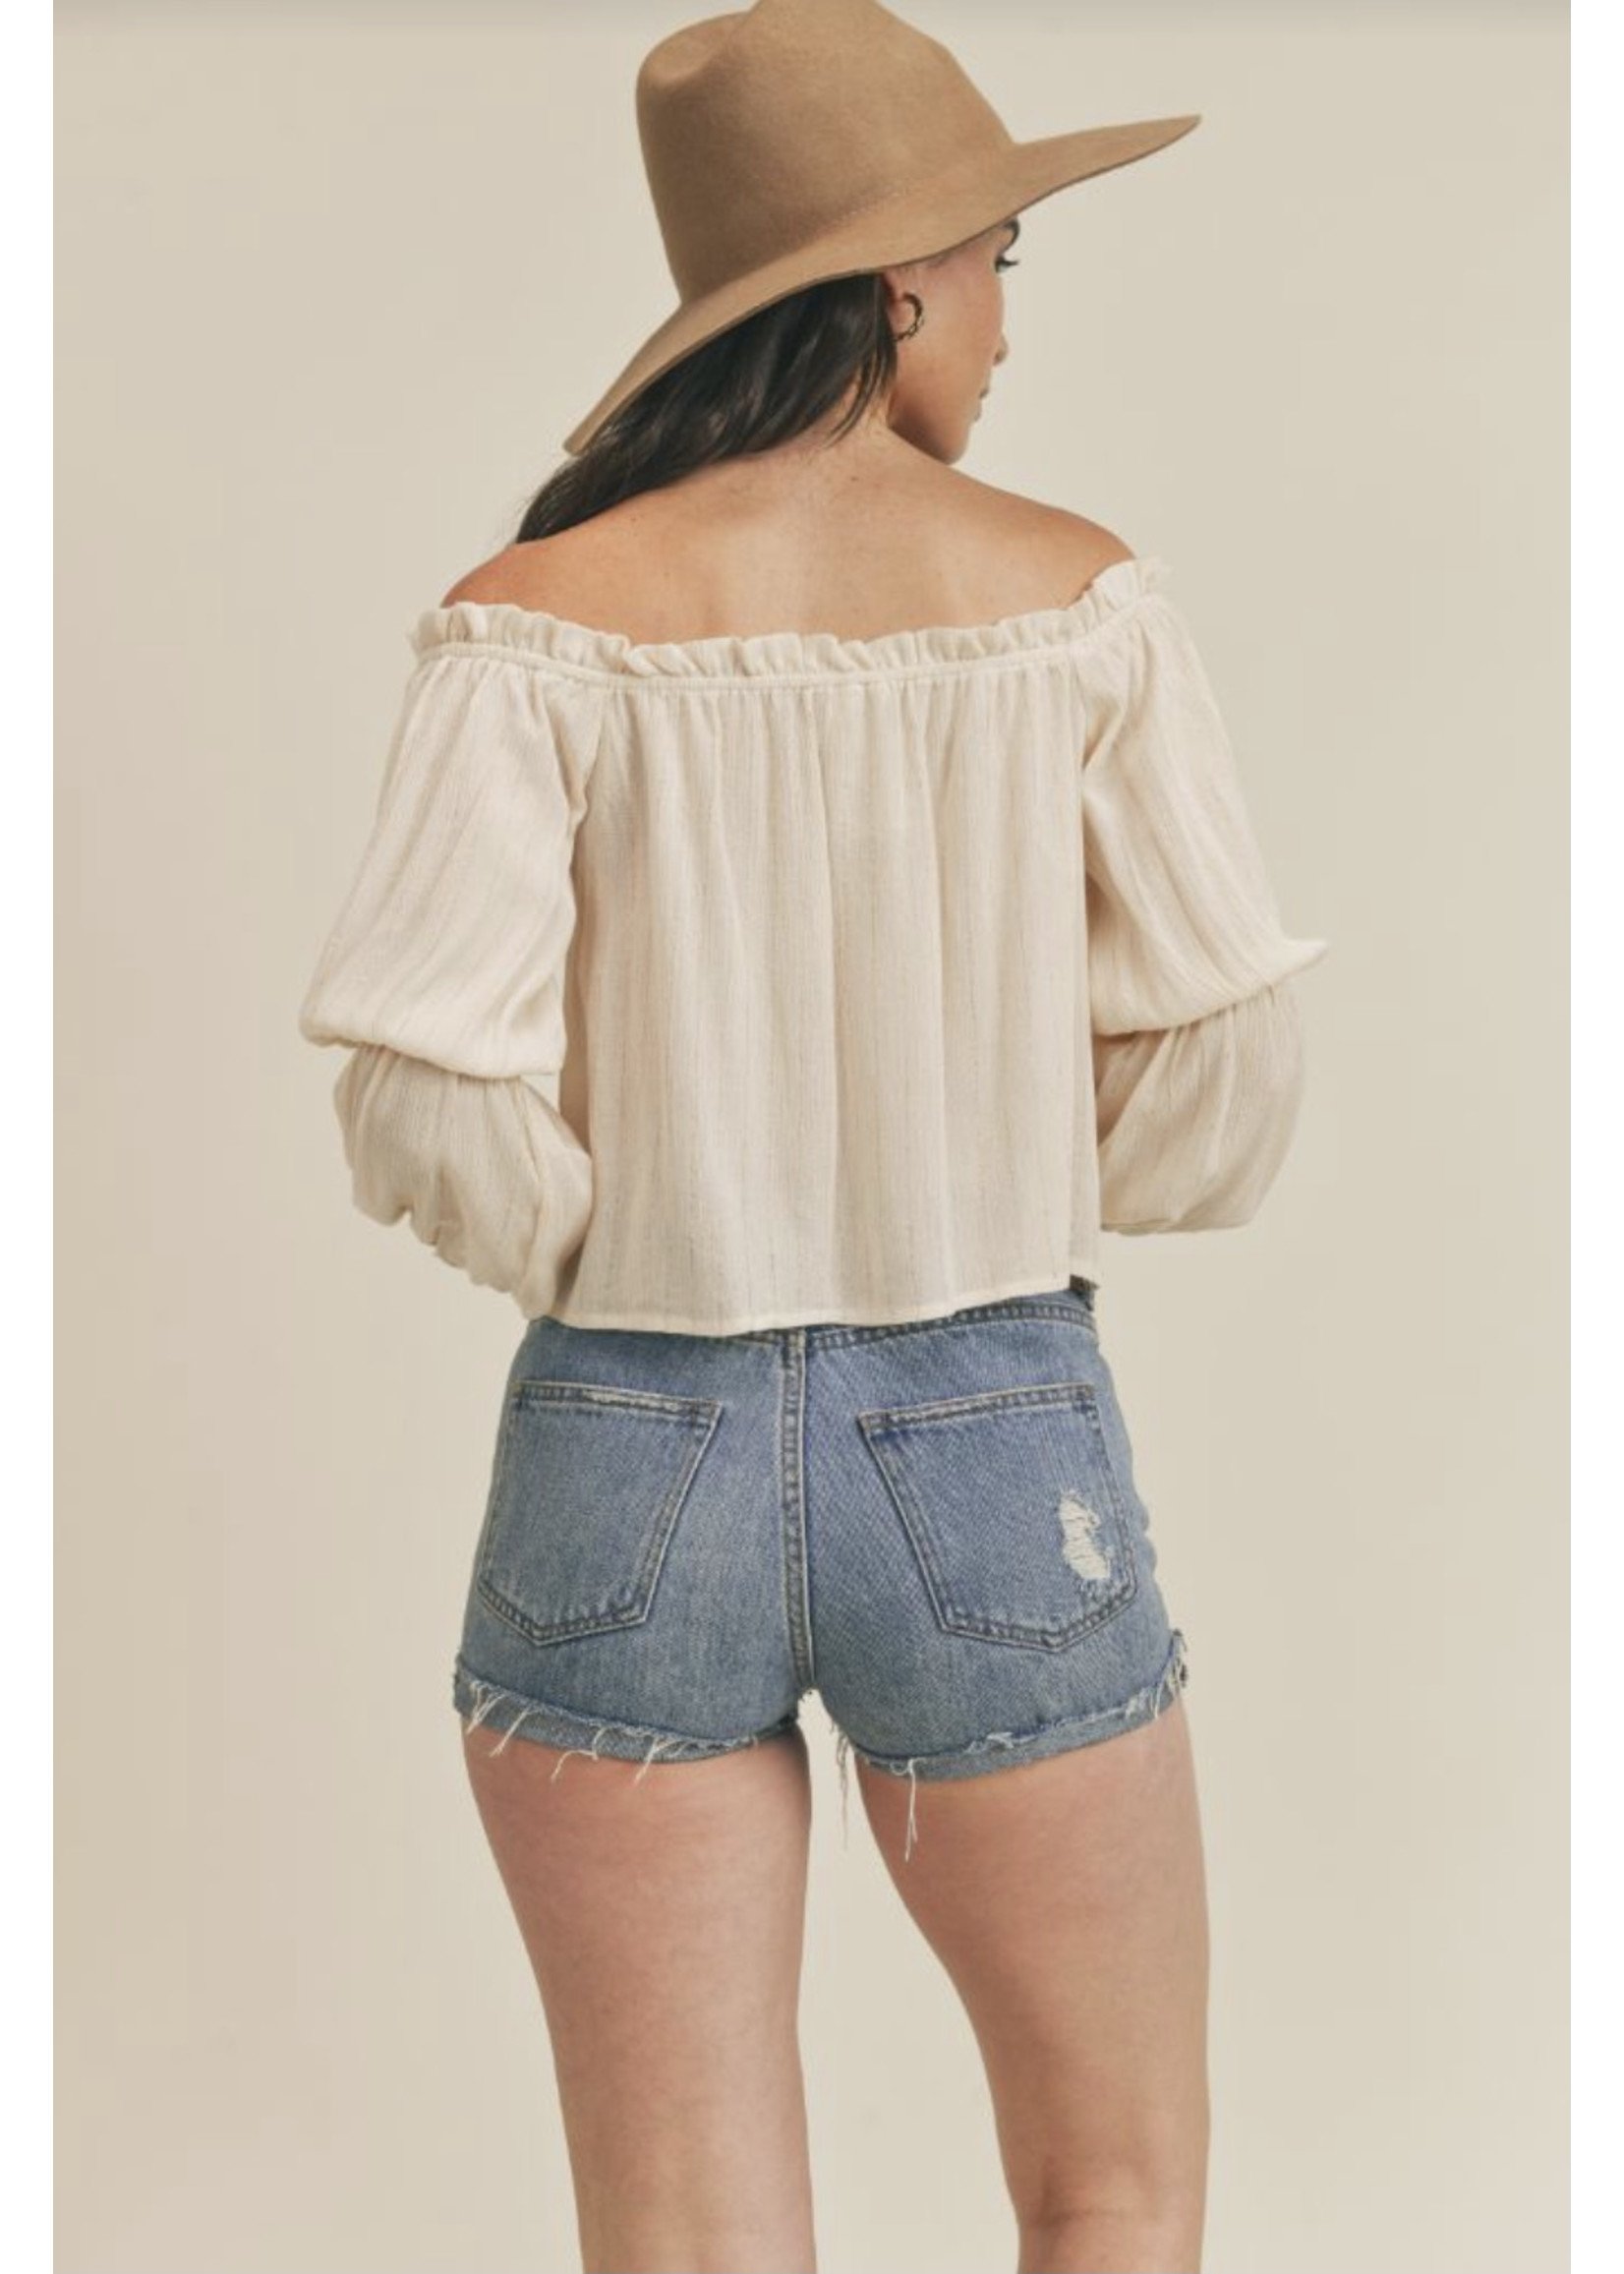 Sadie & Sage Whatever She's Got Off The Shoulder Top - AD114098